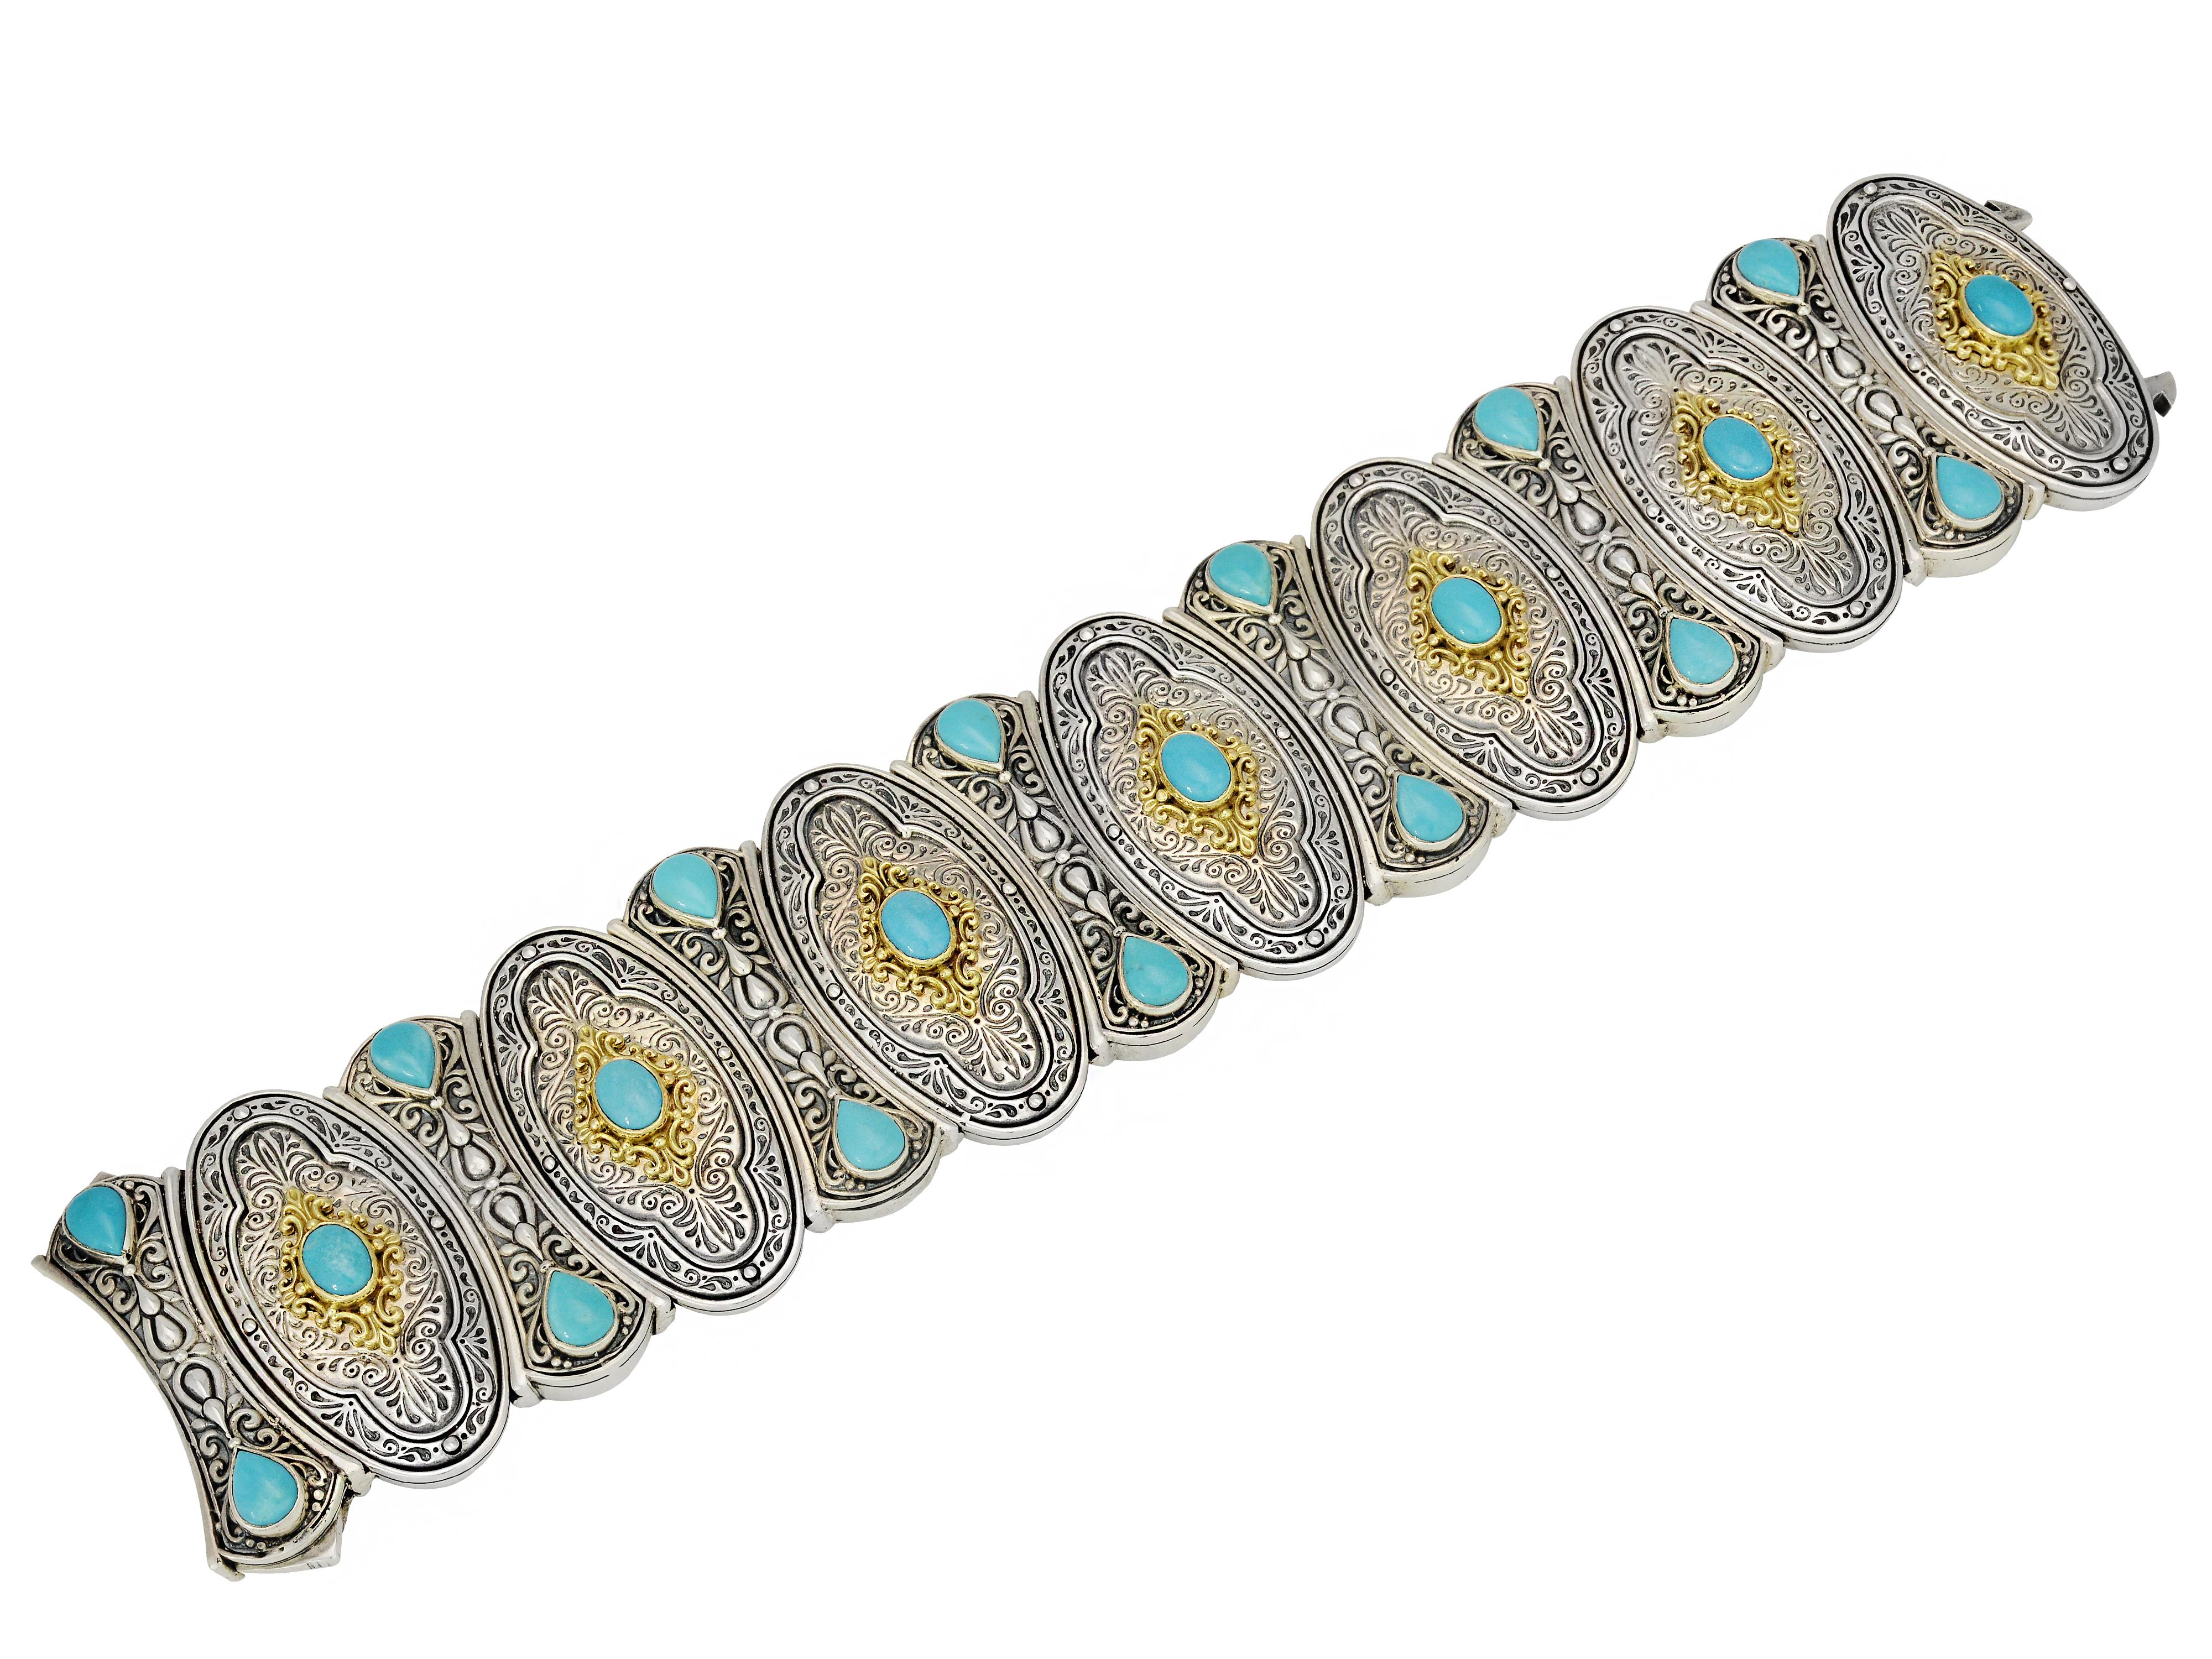 Oval Cut Konstantino Sterling Silver, Gold, and Turquoise Bracelet